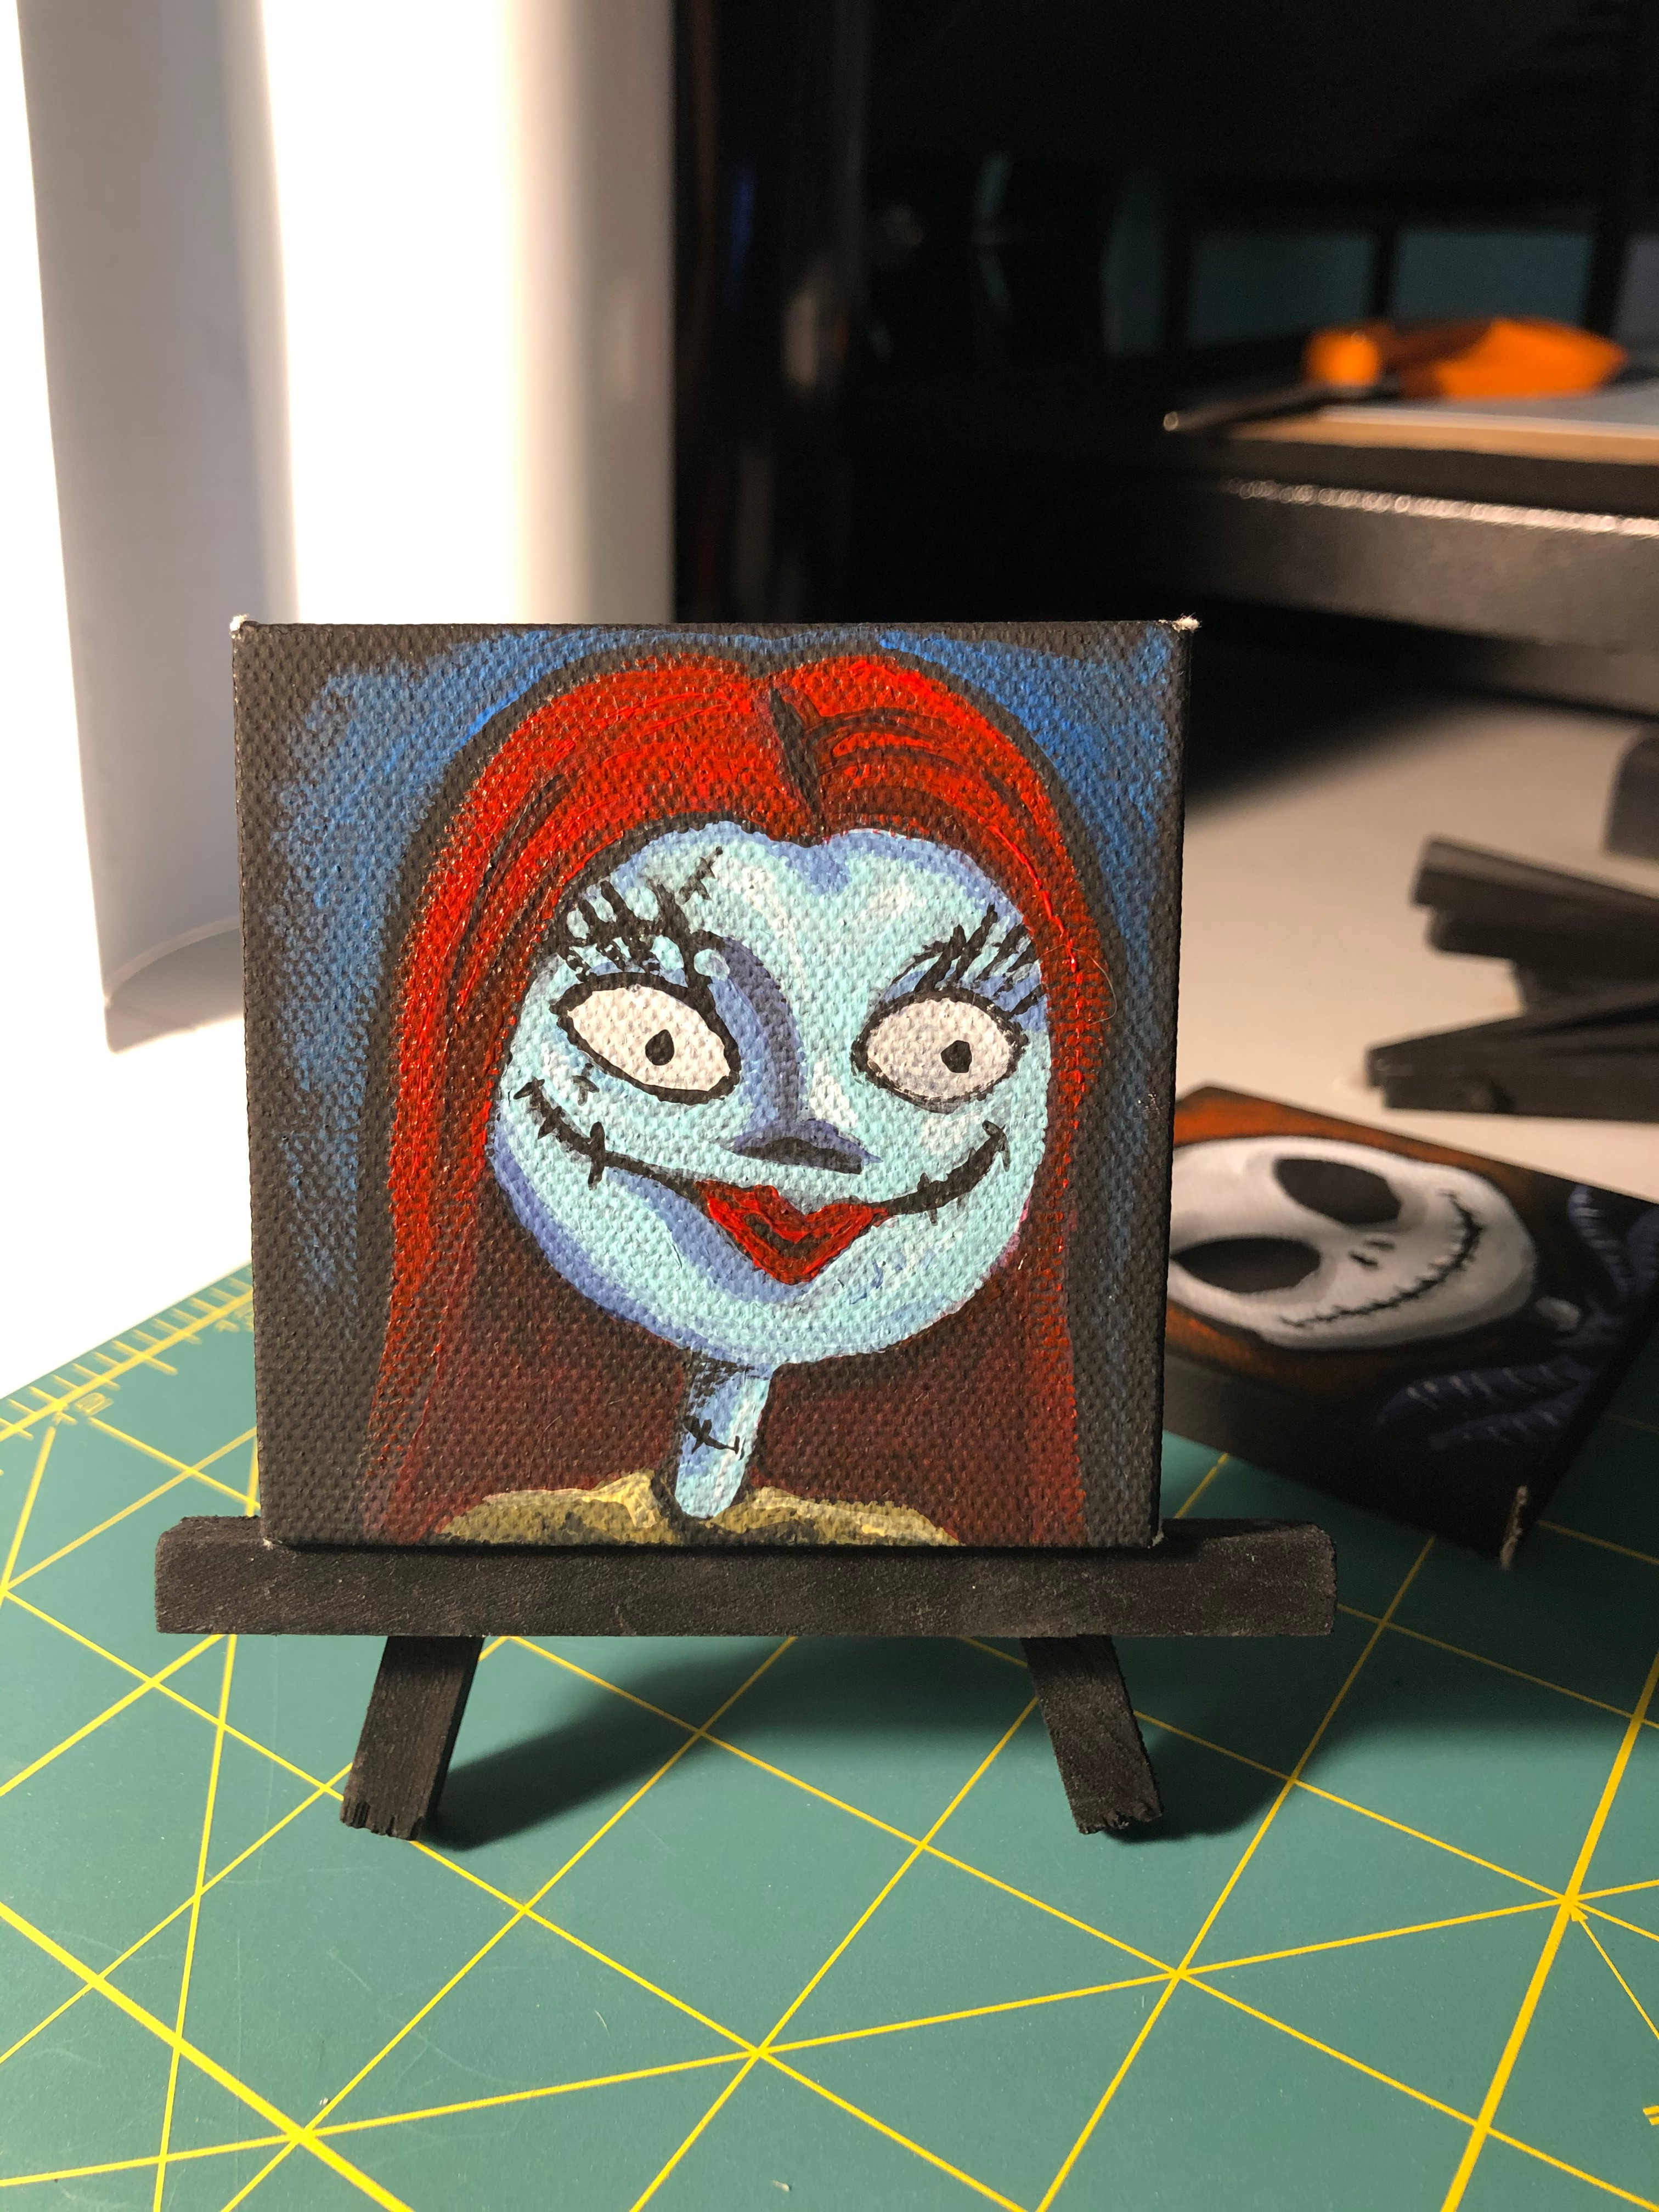 Nightmare Before Christmas, Sally. Acrylic paintings on black mini canvas, 3x3 in.